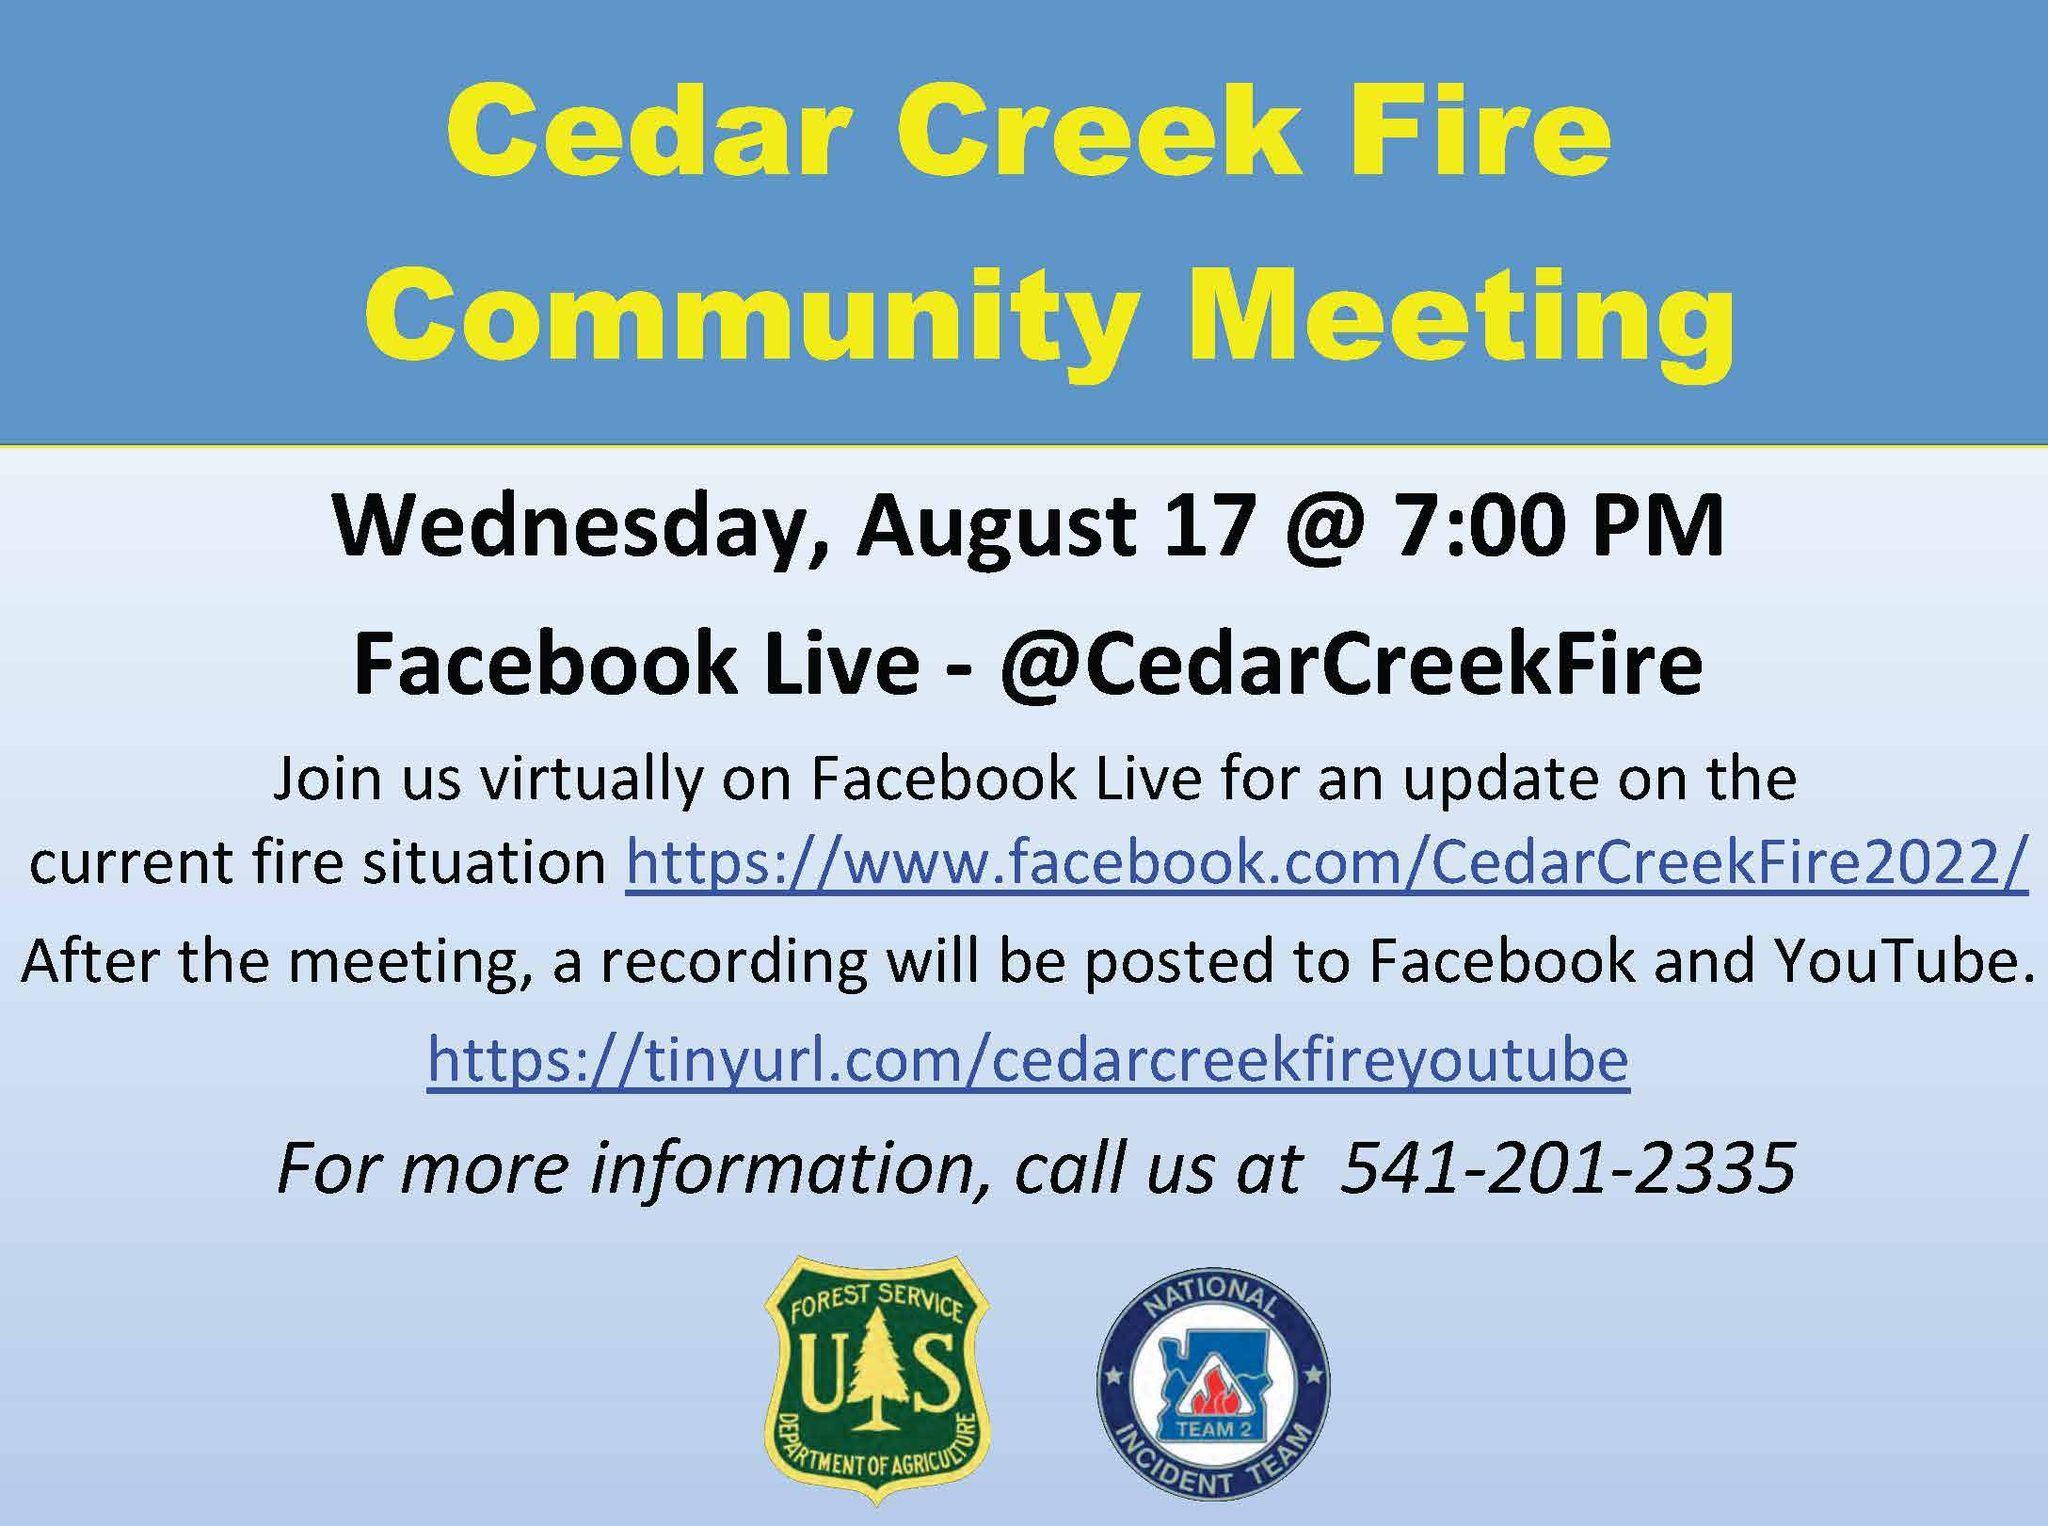 Flyer with information on how to accessing the August 17 virtual community meeting for the Cedar Creek Fire.